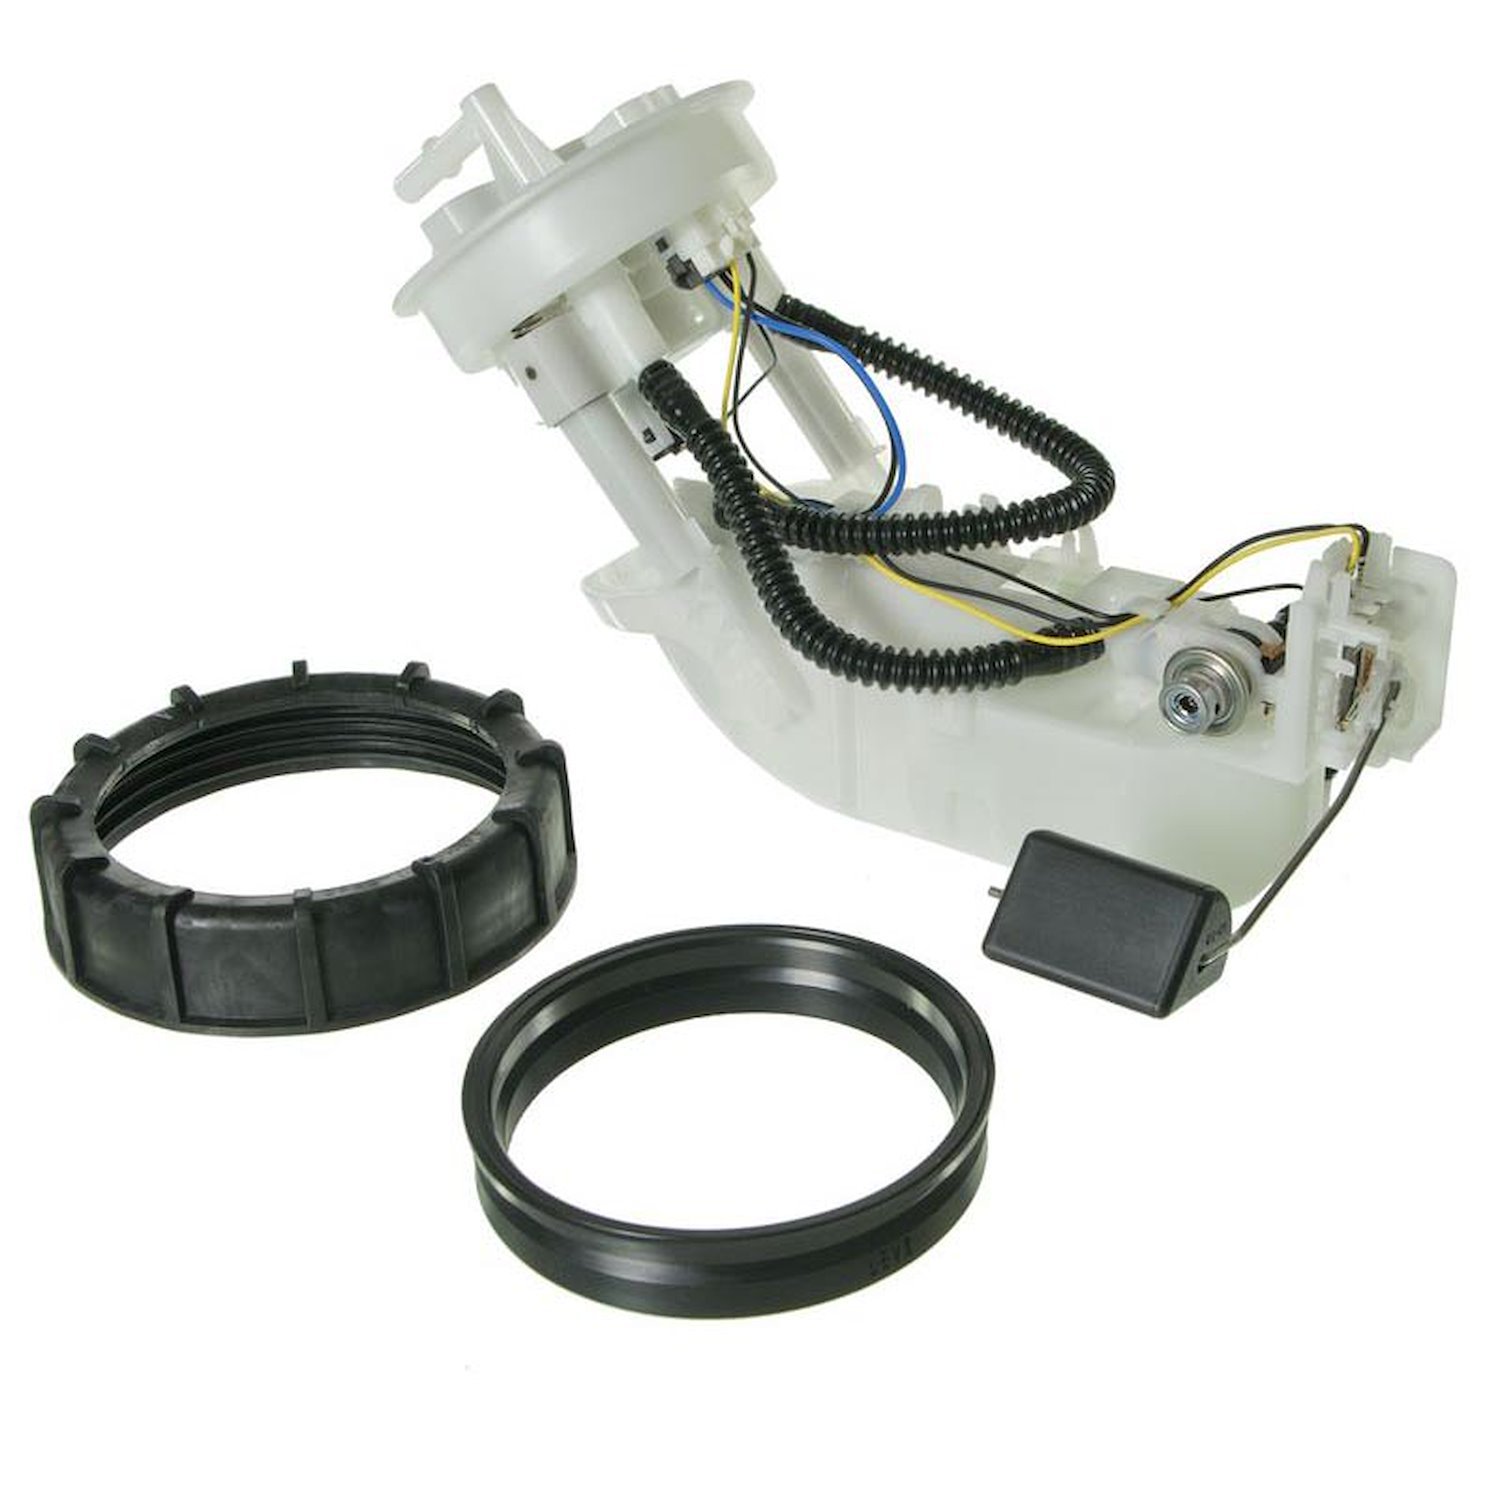 OE Replacement Fuel Pump Module Assembly for 2005-2006 Acura RSX